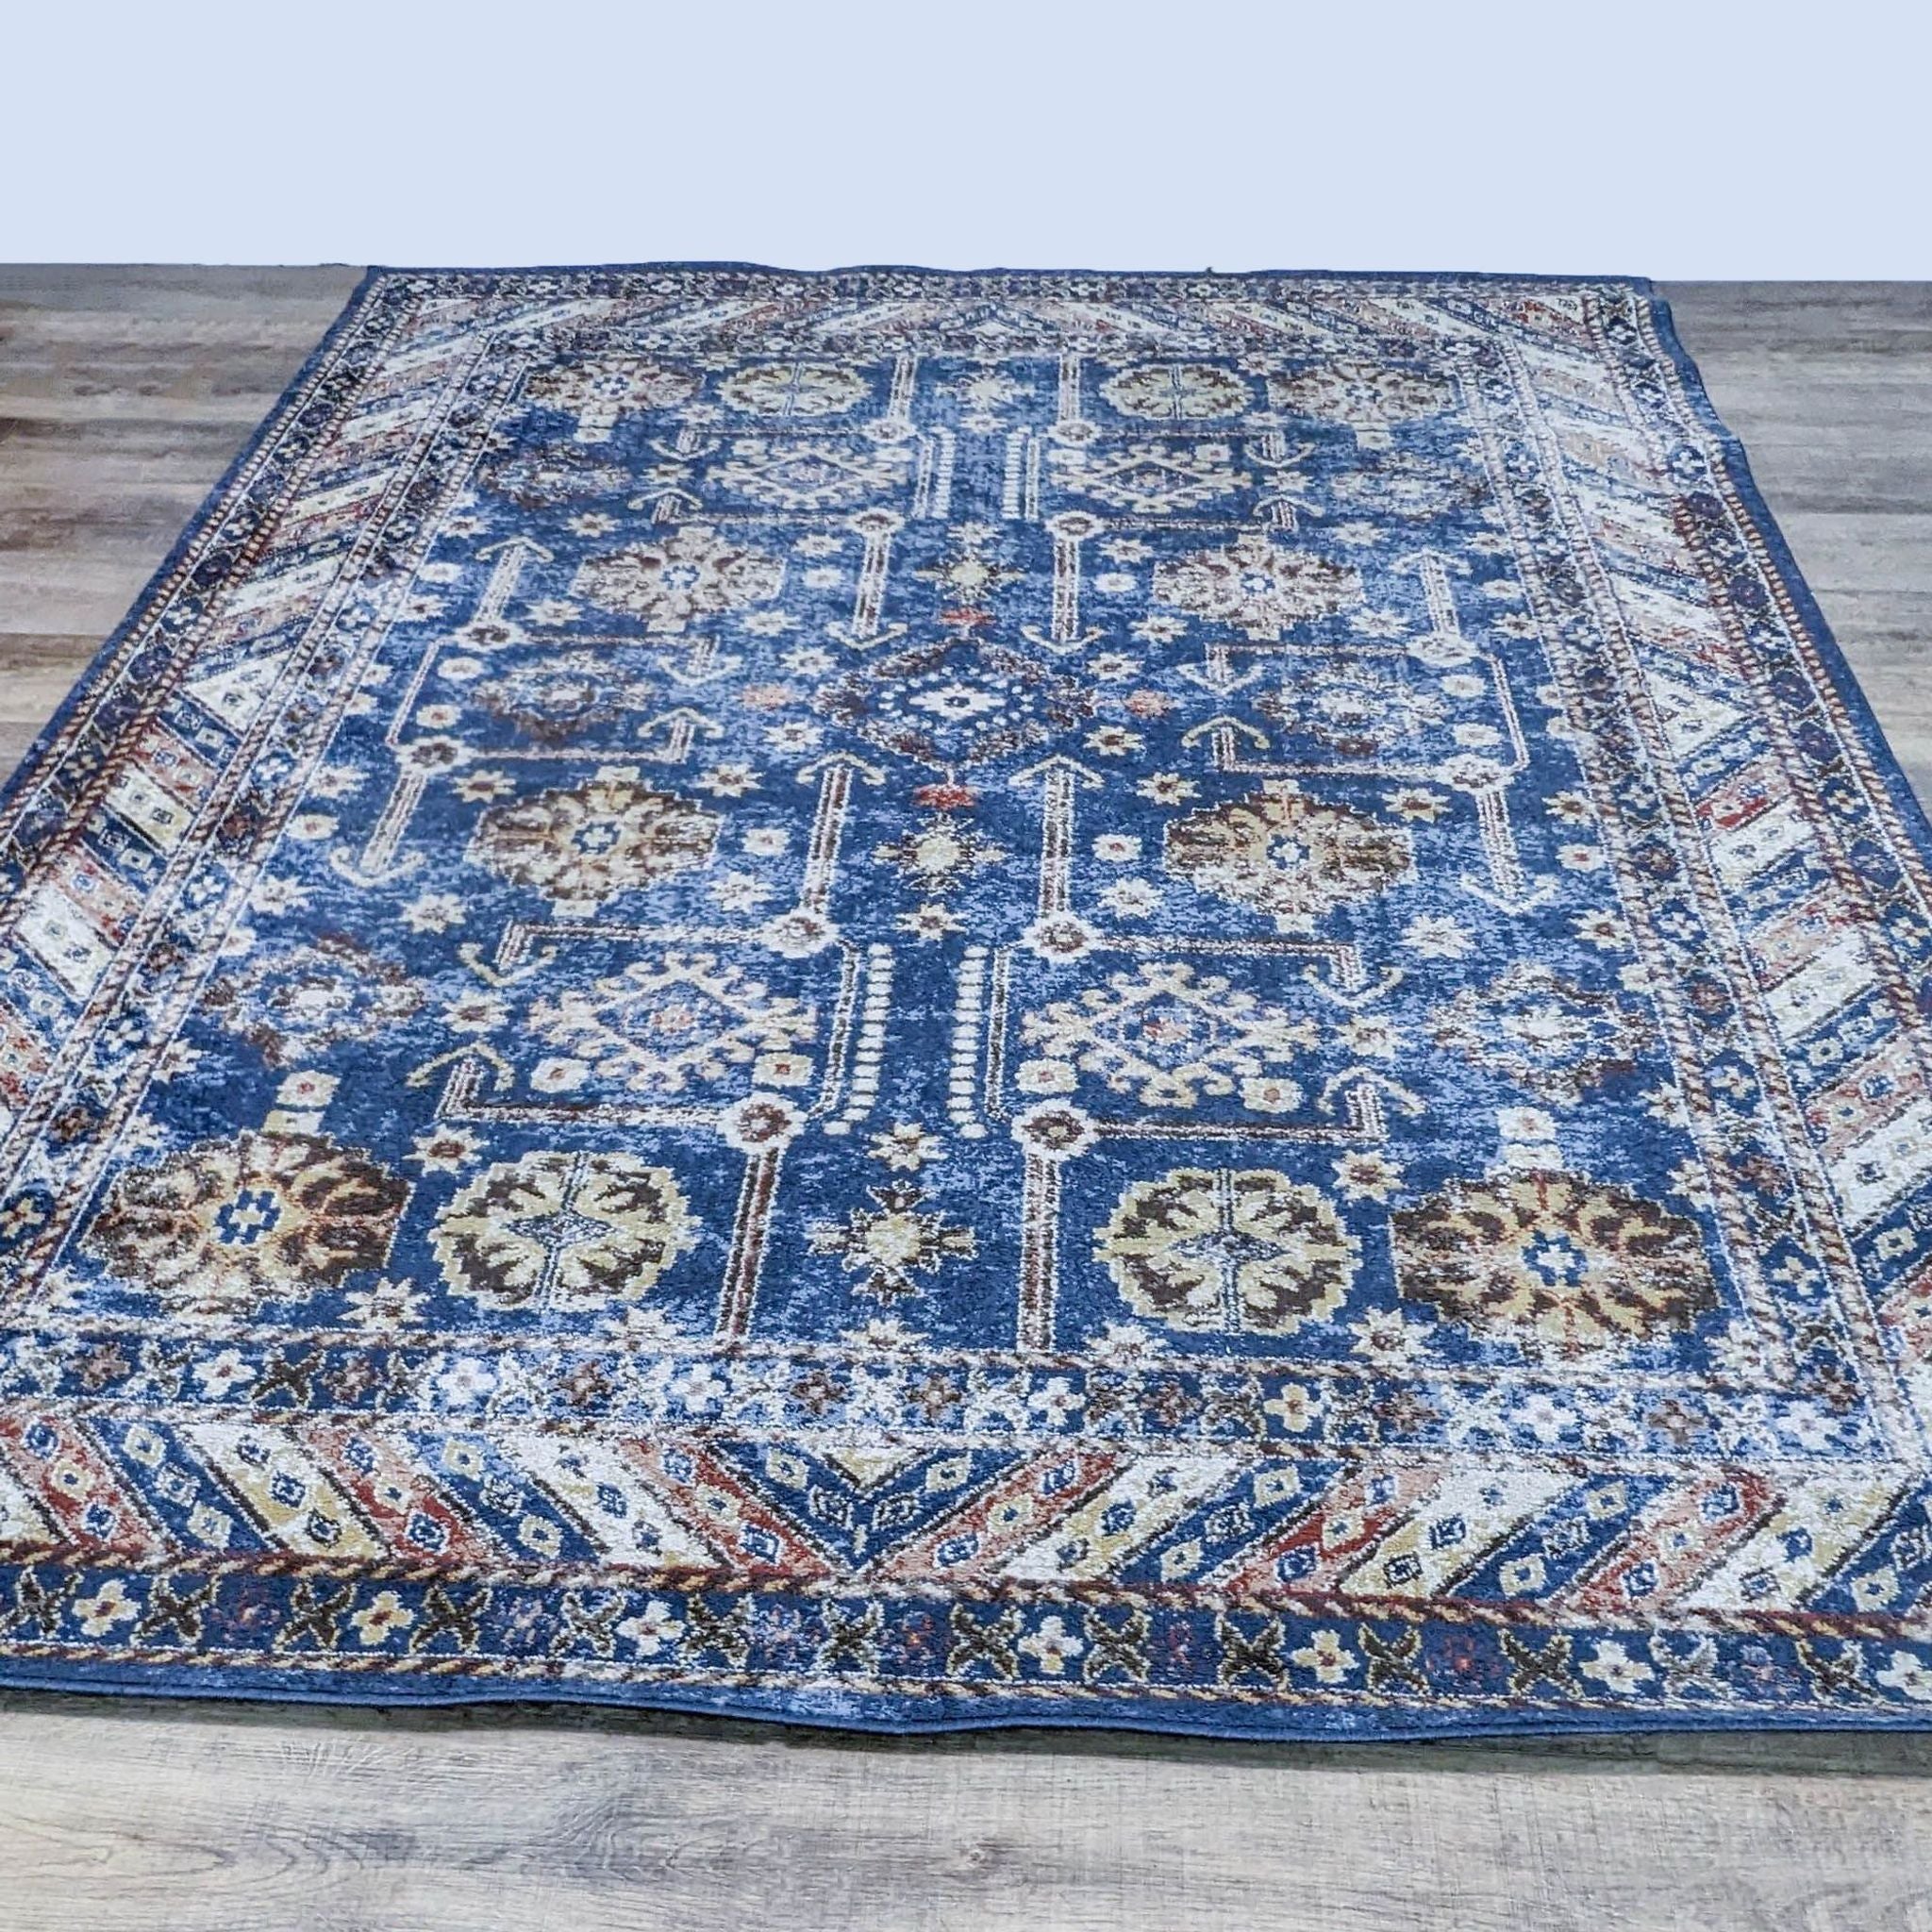 Safavieh Bijar 8'x10' Persian style area rug on a wooden floor with mild distressing and stain-resistant synthetic build.